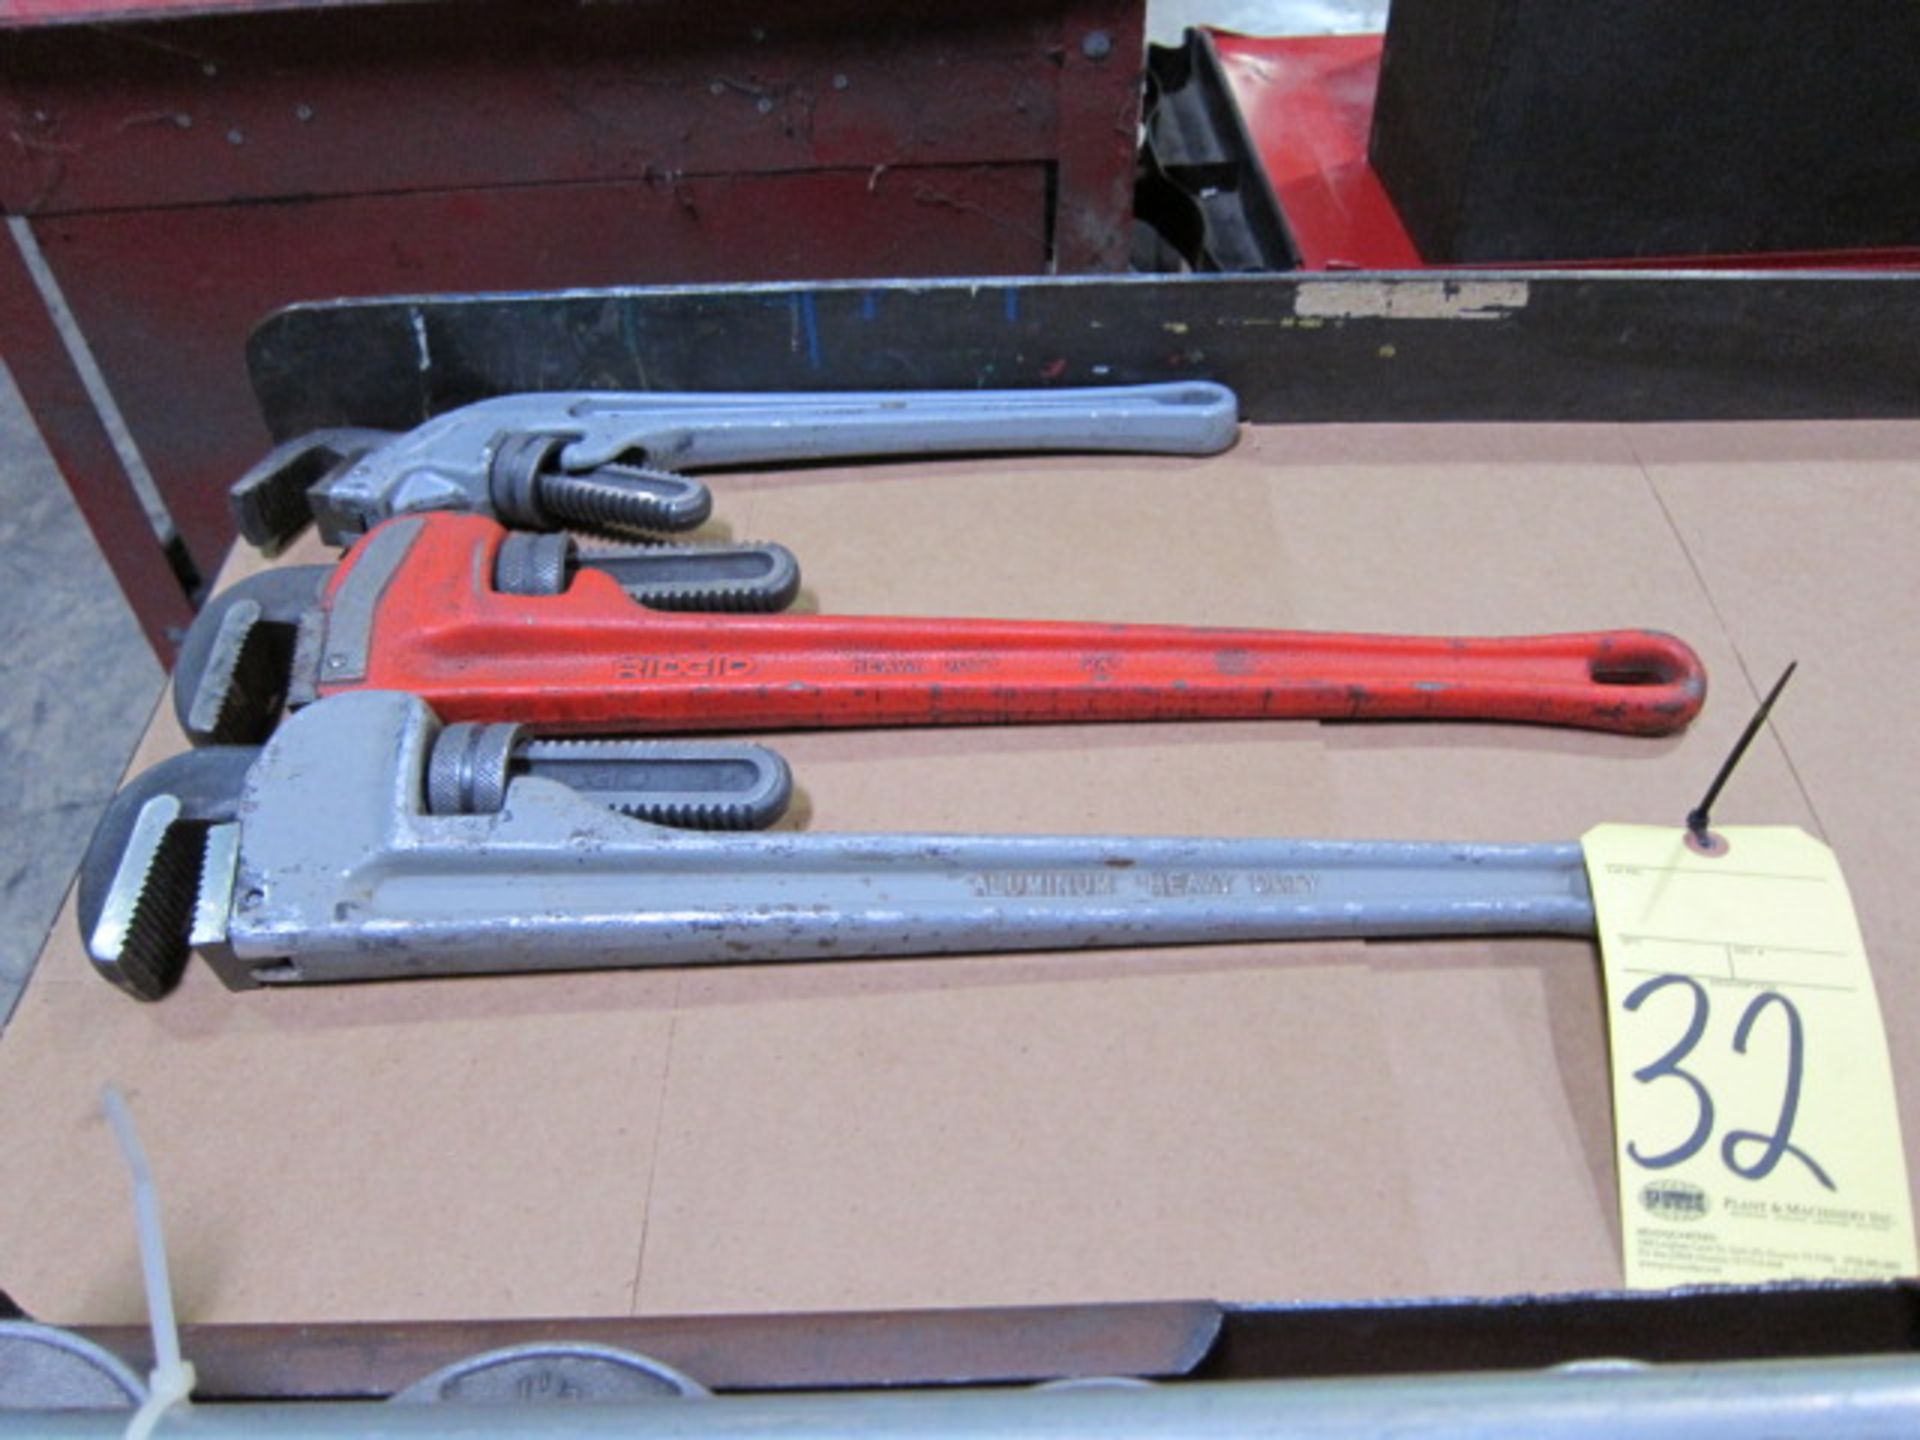 LOT OF PIPE WRENCHES (3), RIDGID, (2) 24" & (1) 18"